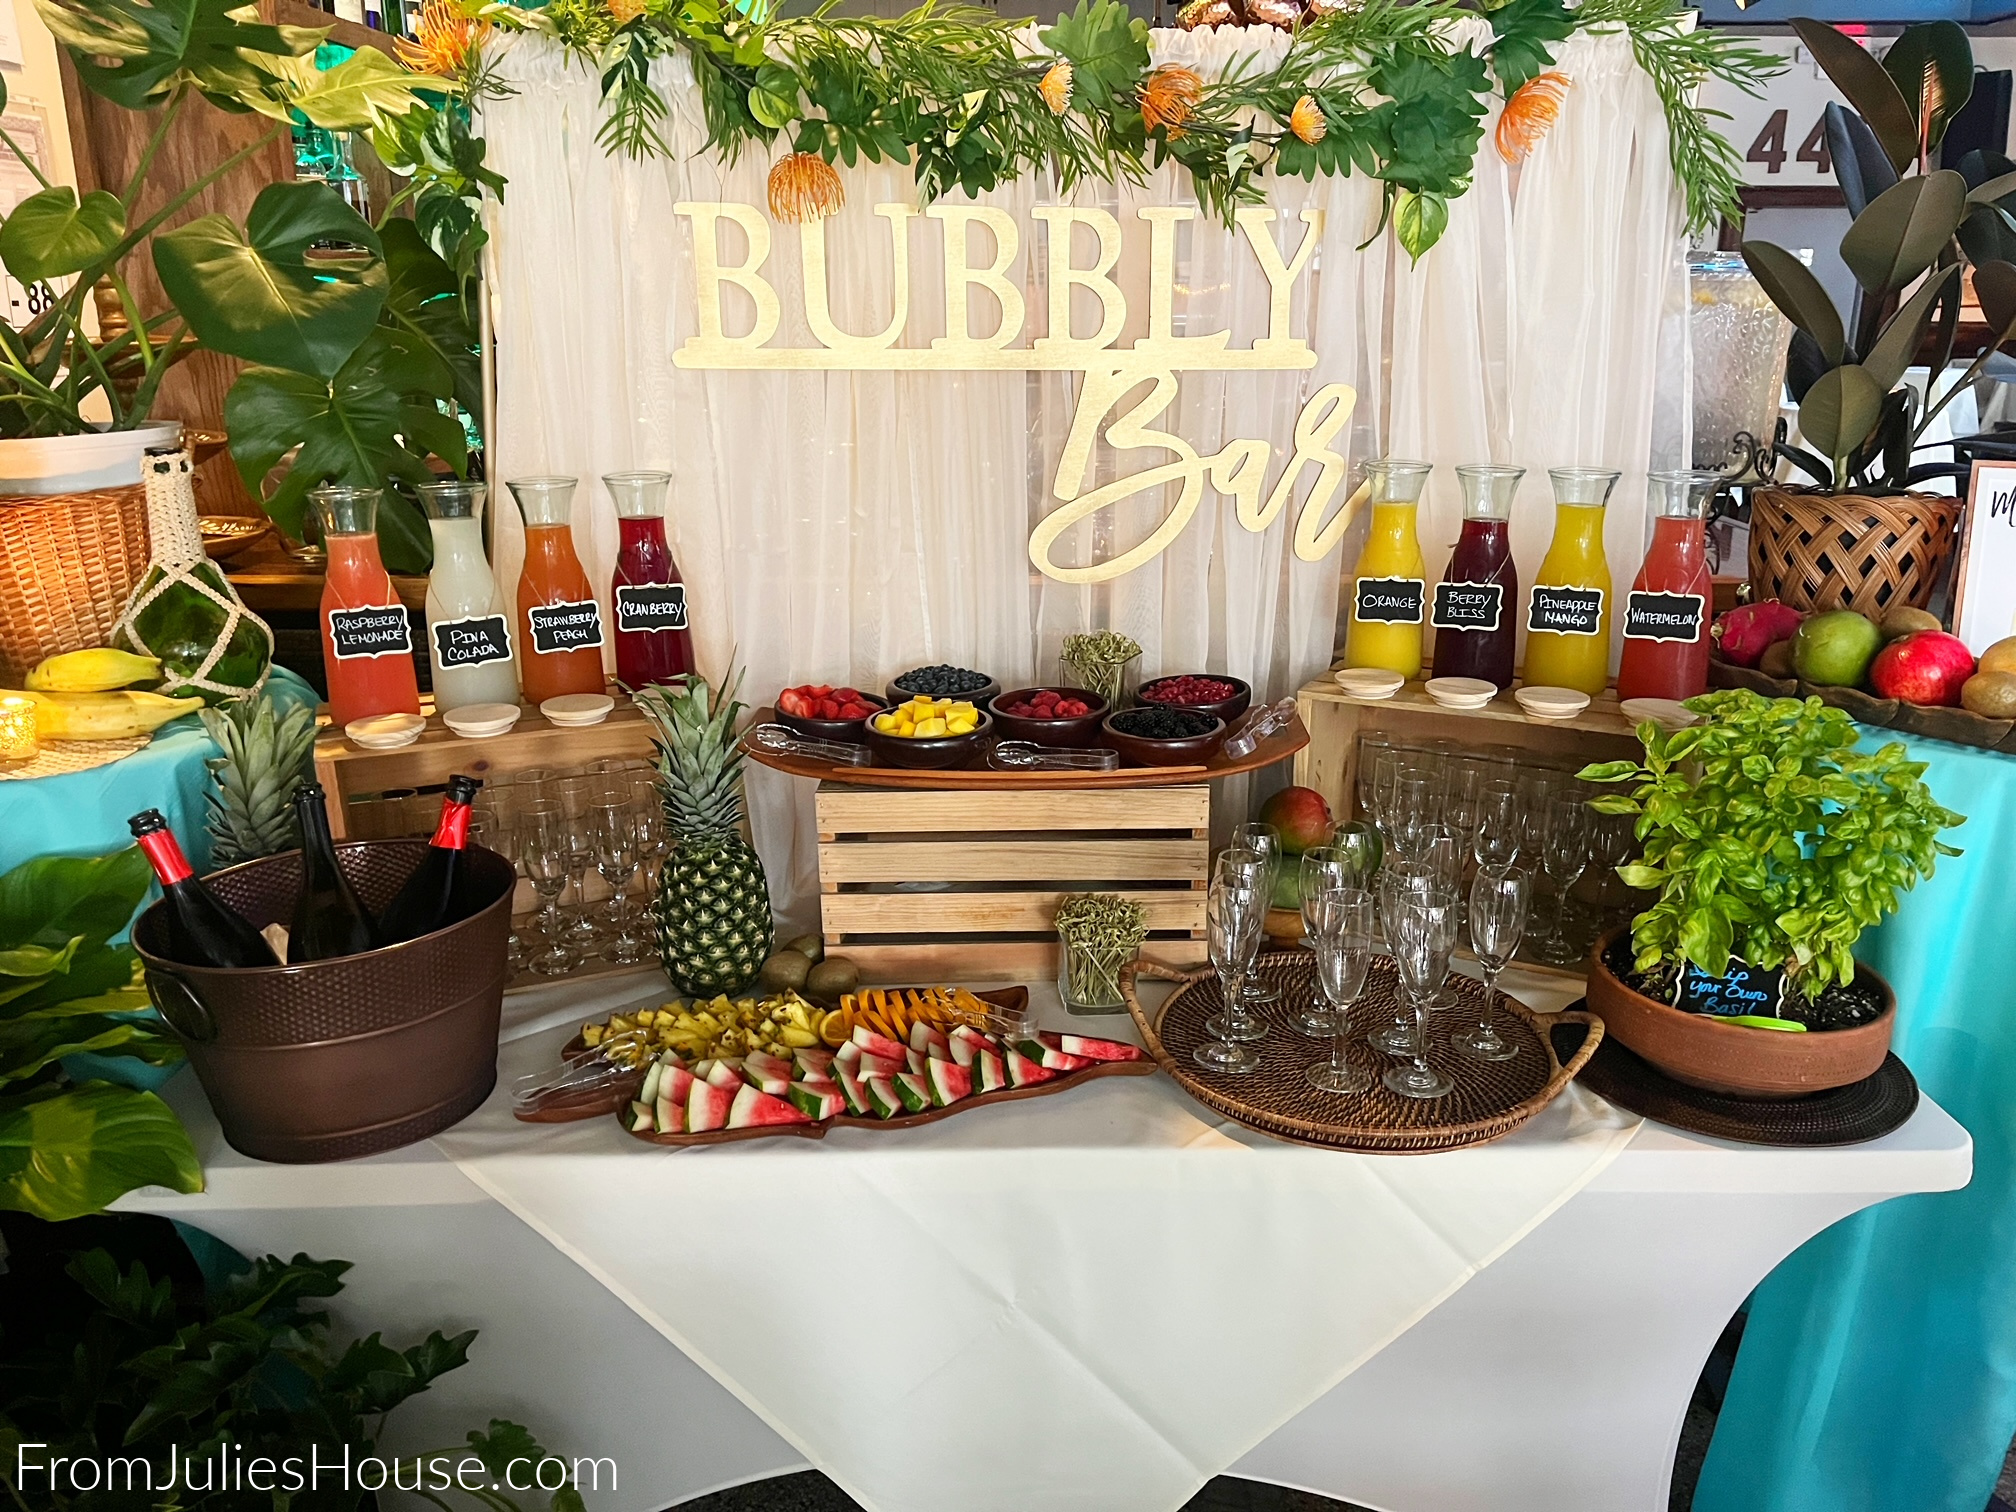 Tropical Mimosa Bar - From Julie's House